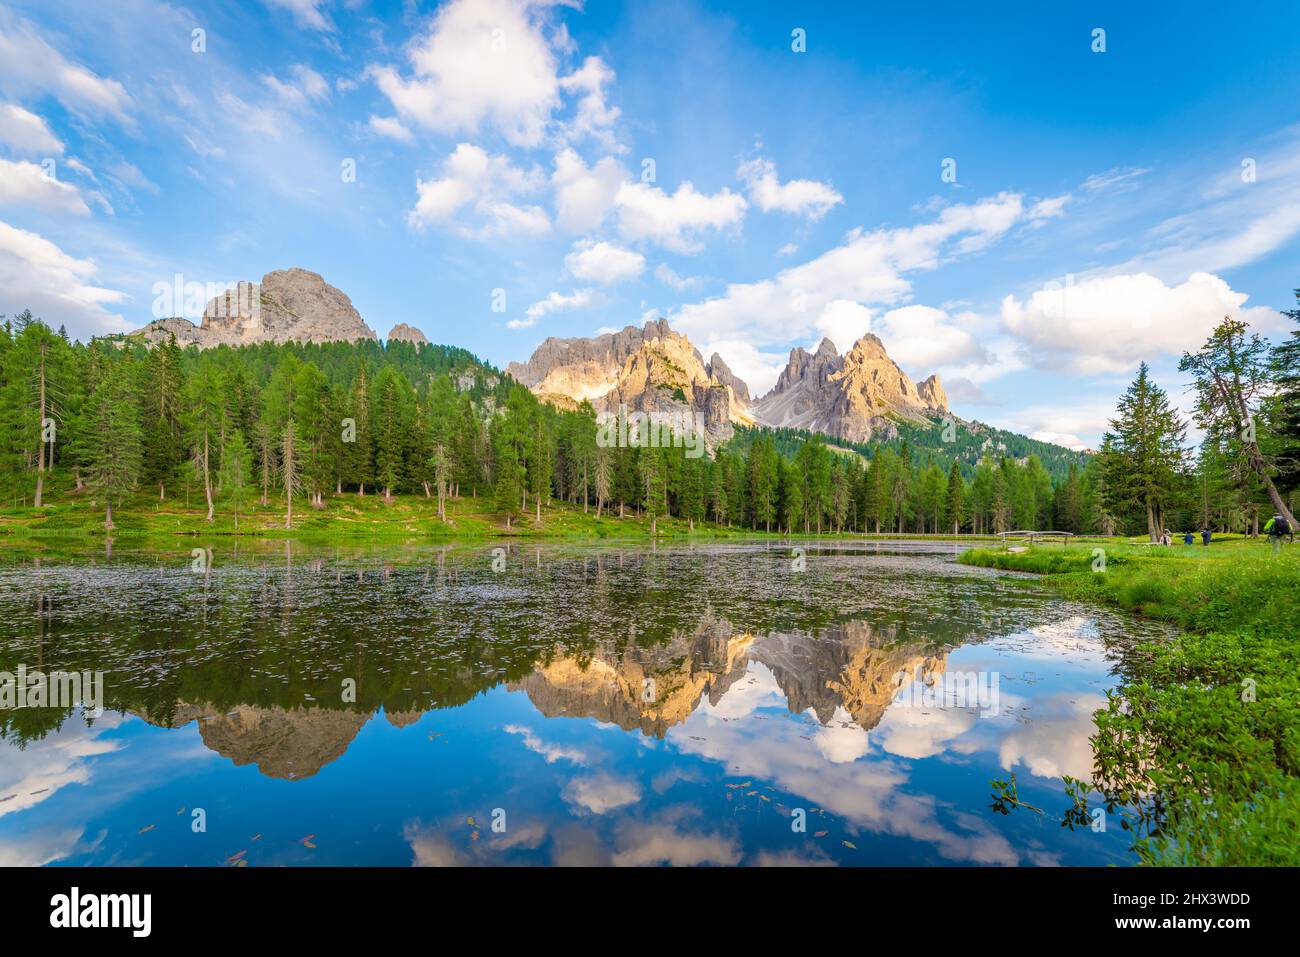 Dolomites Alps, lake and reflection, Summer in Italy. Stock Photo